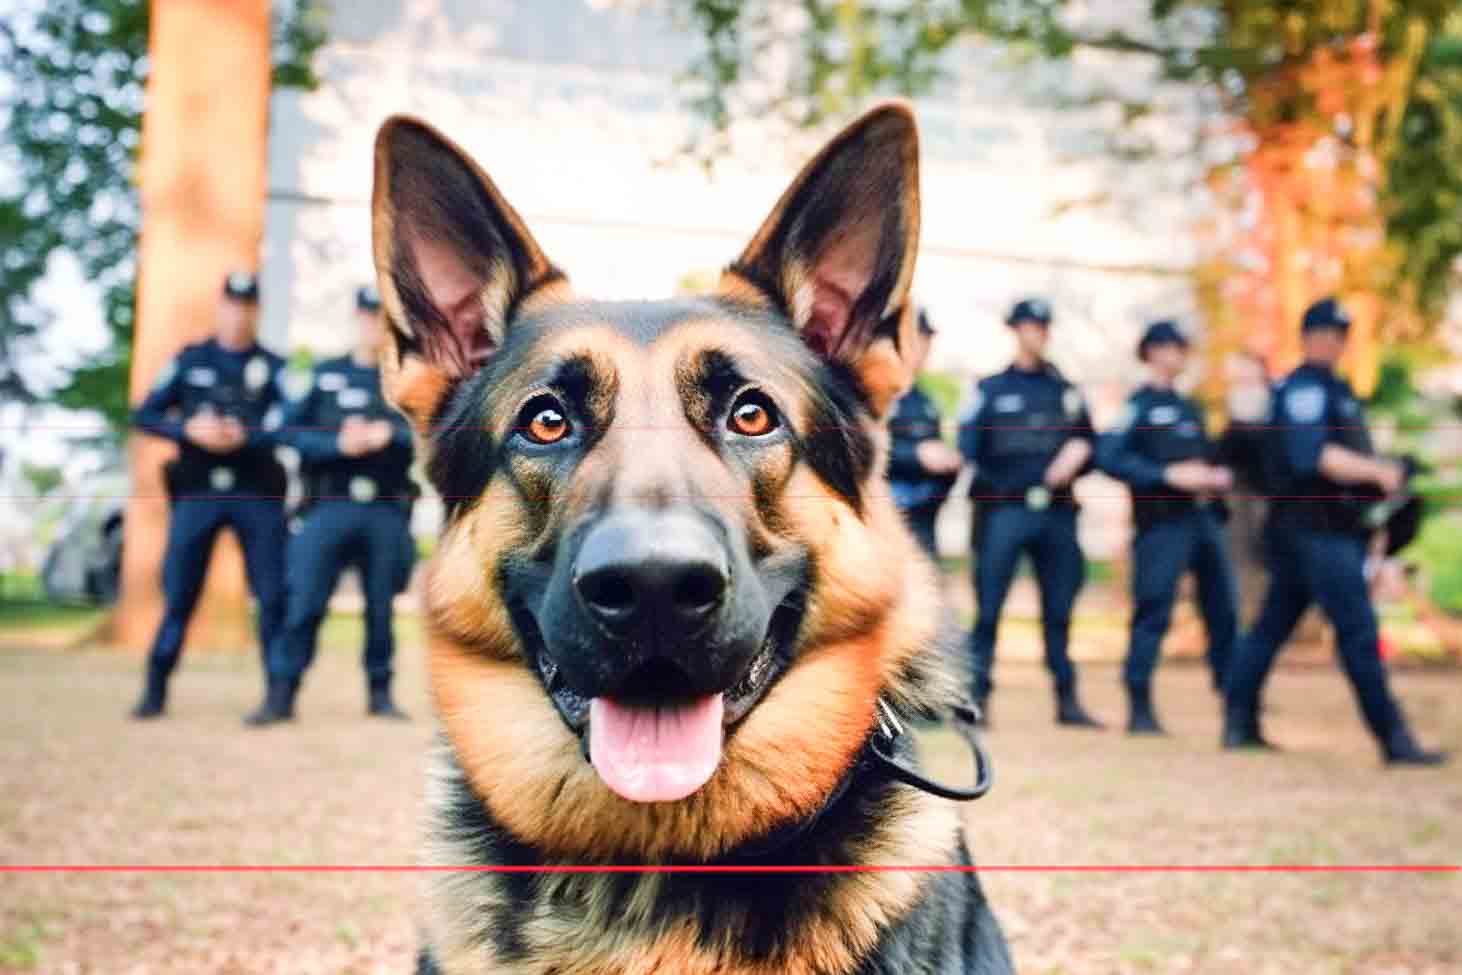 A close-up picture of a German Shepherd with its tongue out, standing on grass. In the background, a line of police officers in uniform slightly blurred. The scene takes place outdoors with trees and a building visible behind the officers.